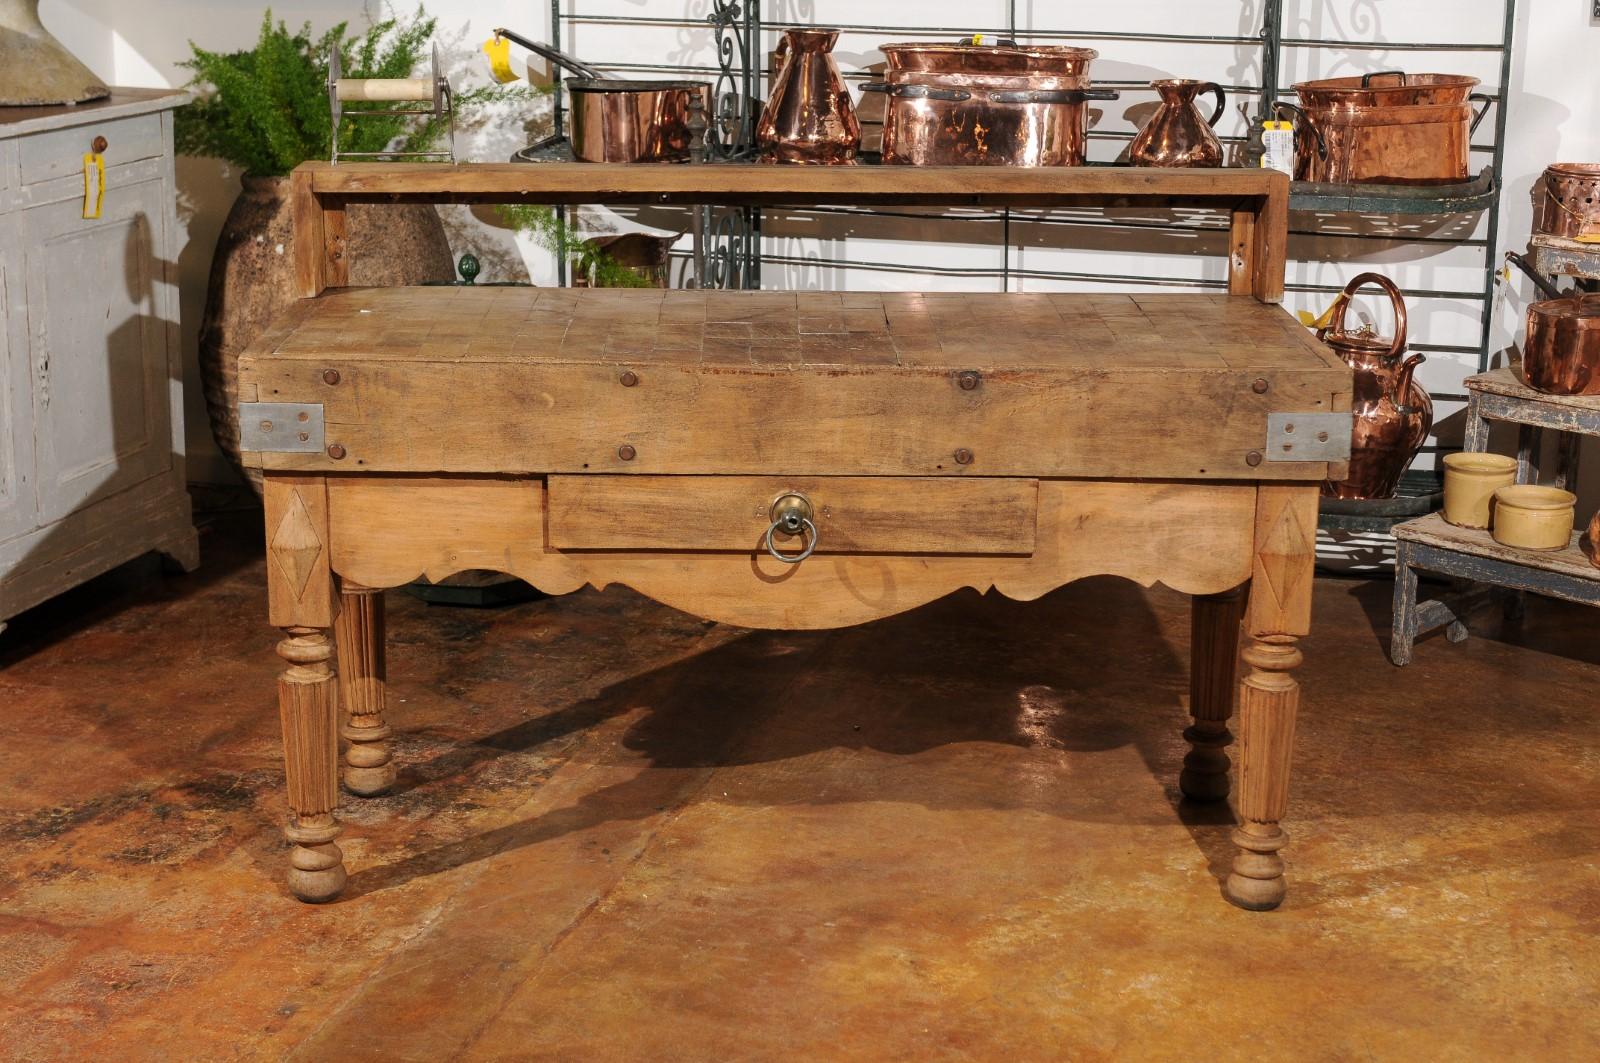 A French butcher block table from the 19th century, with single drawer, utensil holder and carved apron. Born in France during the 19th century, this chopping work table features a rectangular top with utensil holder, sitting above a nicely